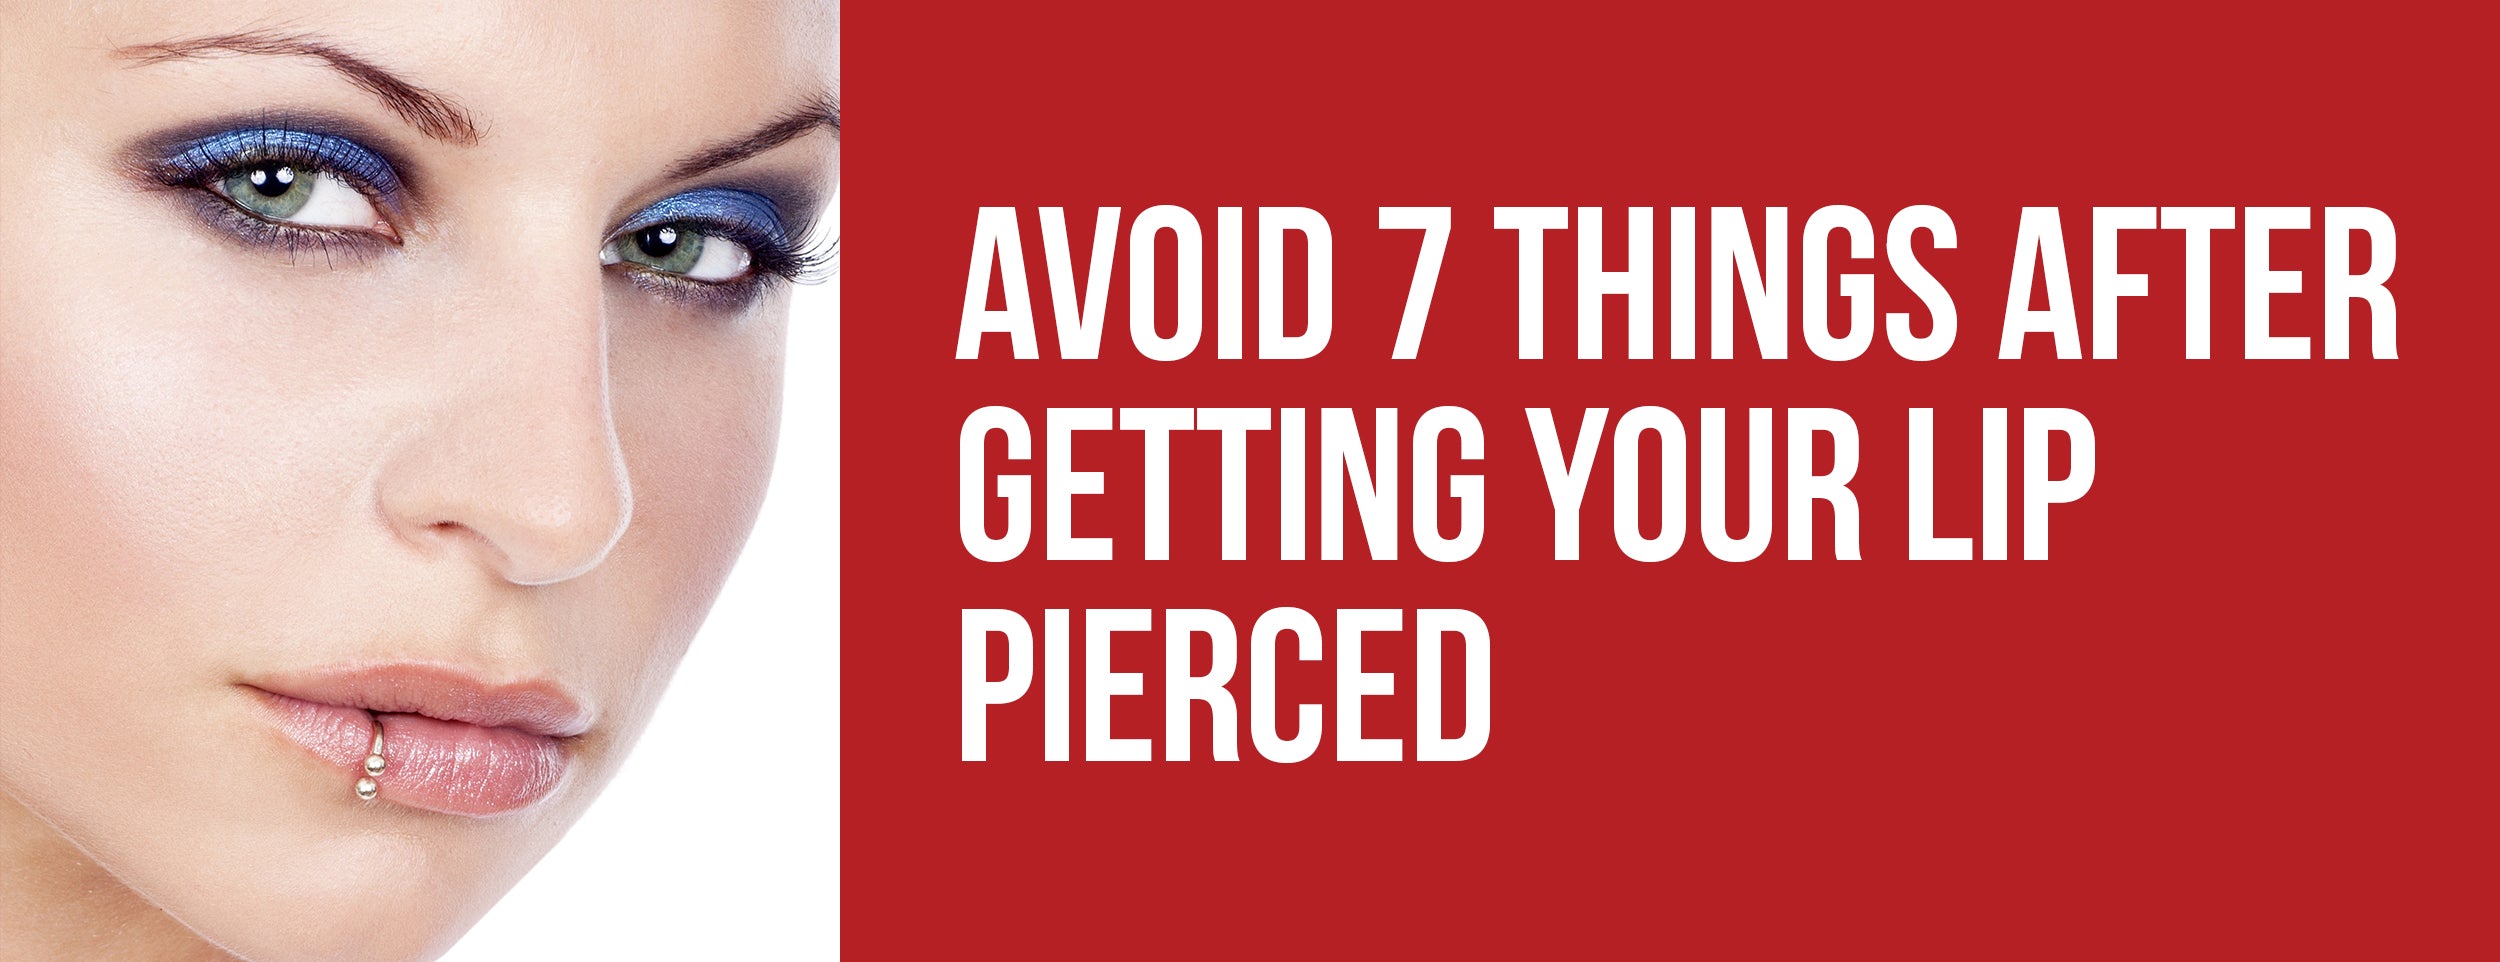 After getting your lip pierced, avoid these 7 things